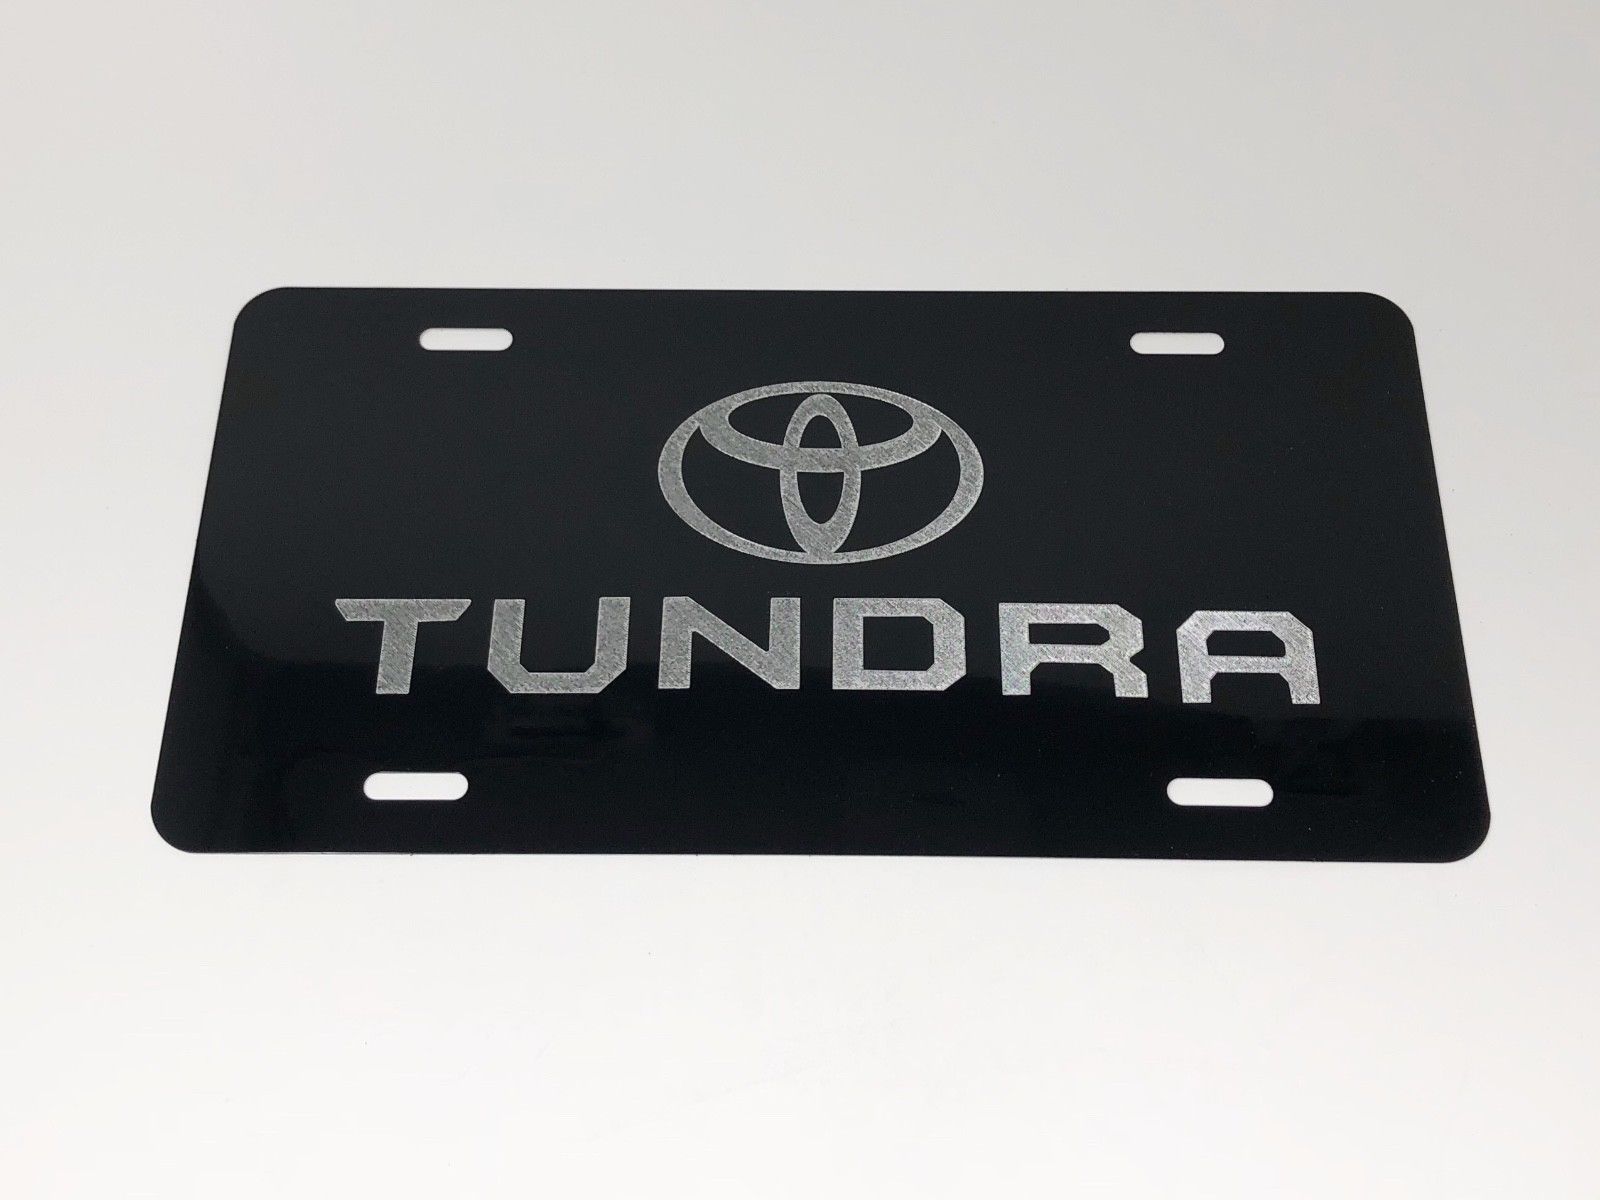 Toyota New Tundra LOGO Car Tag Diamond Etched on Aluminum License Plate